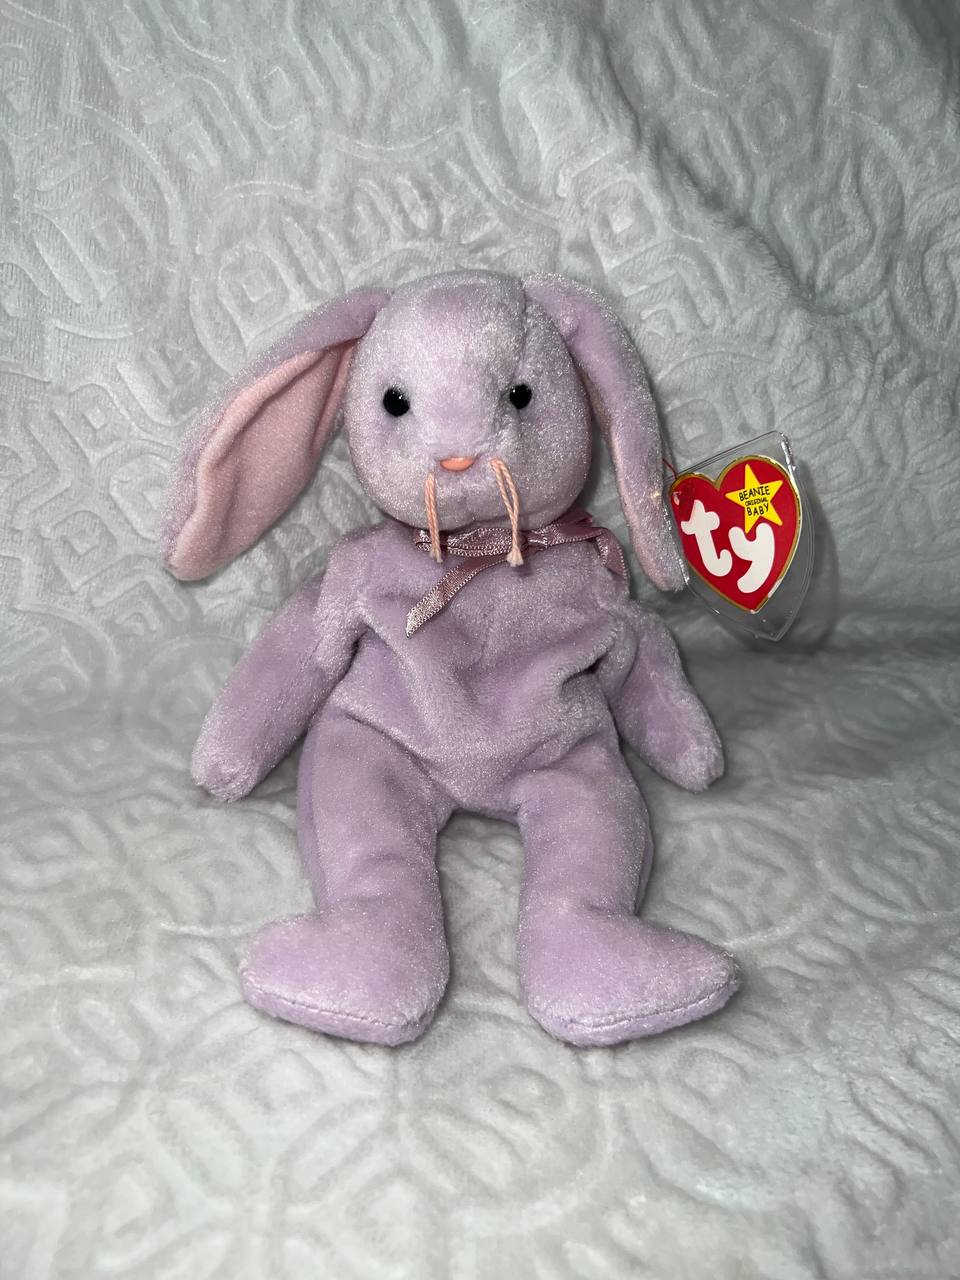 *RARE* MINT Floppity Beanie Baby 1996 With Tag